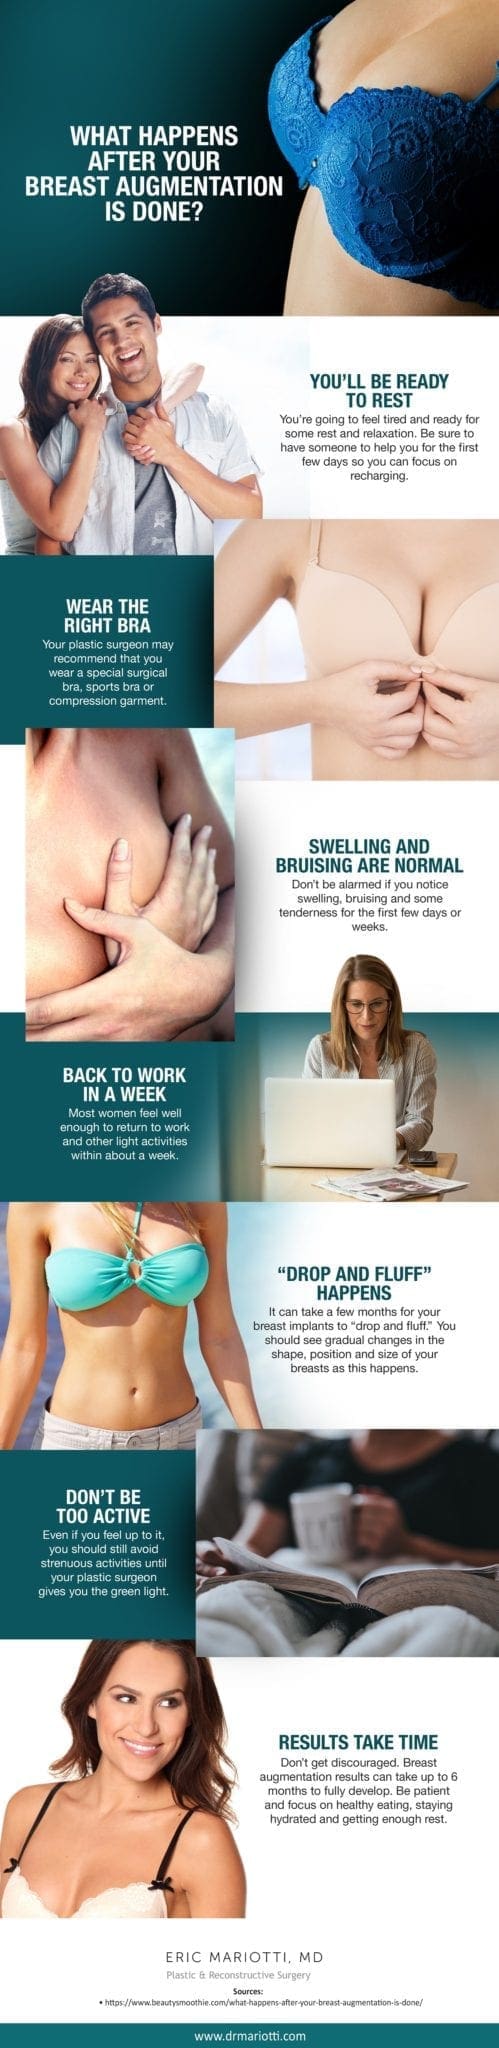 What Happens After Your Breast Augmentation is Done? [Infographic] img 1